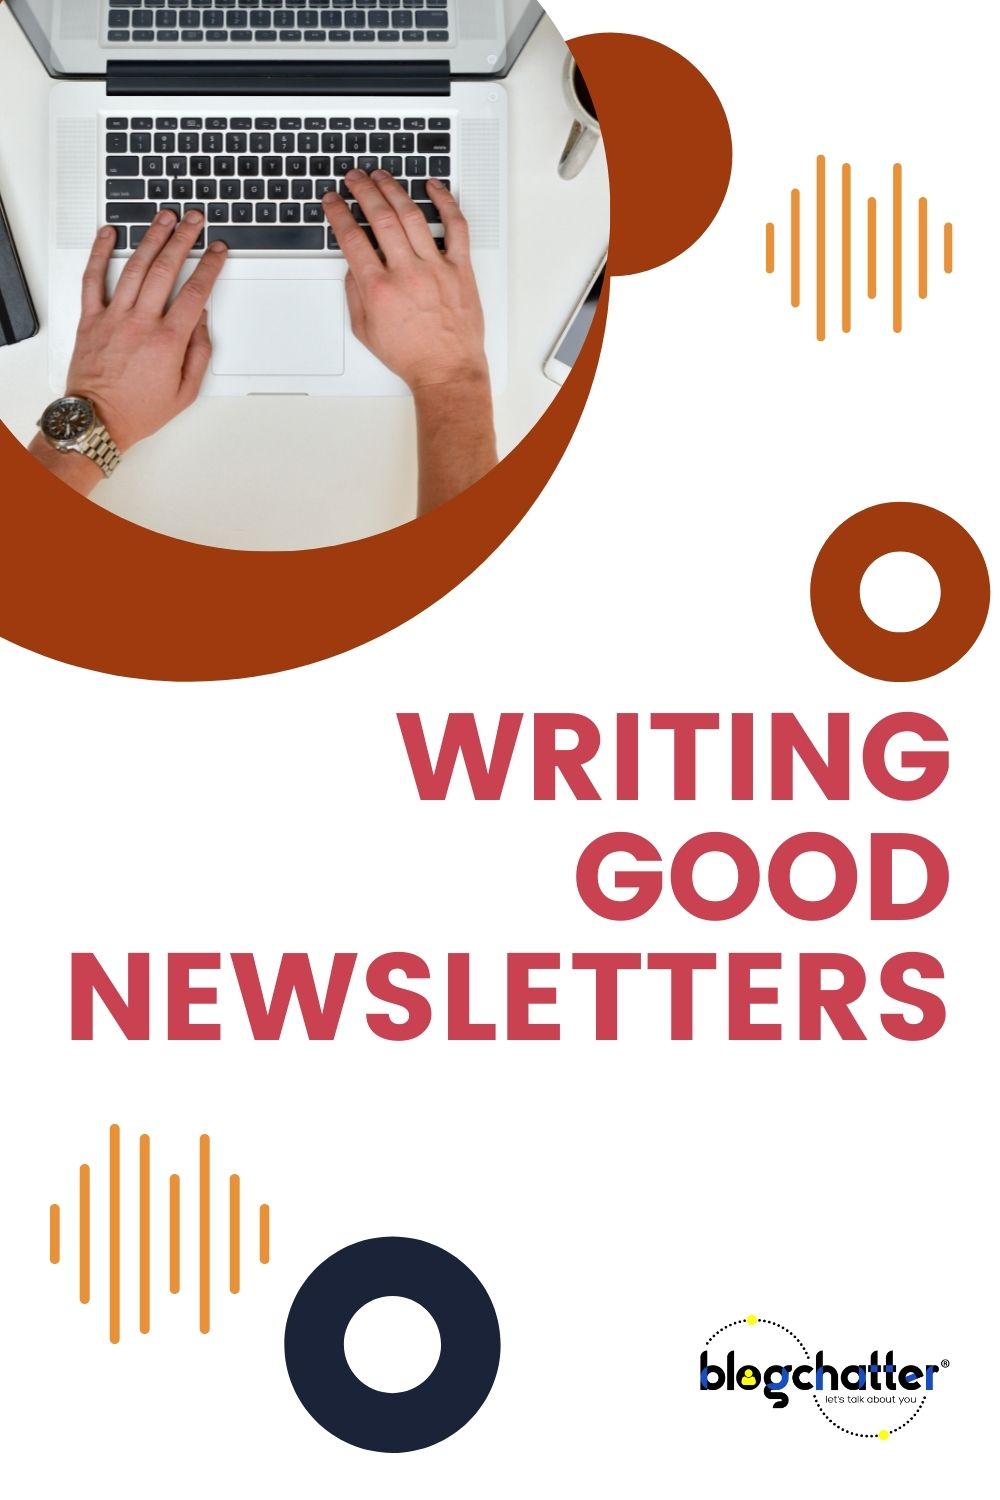 How to write good newsletters